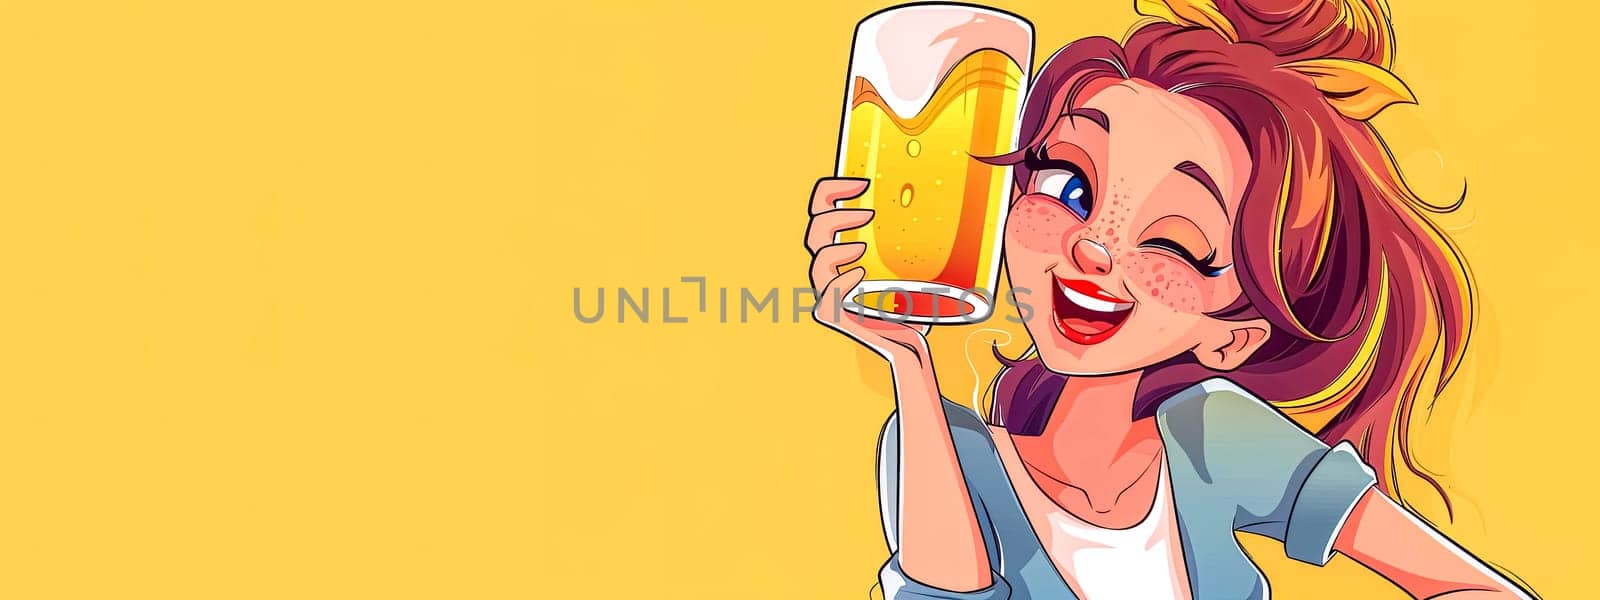 Cheerful Woman Toasting with Beer Illustration by Edophoto